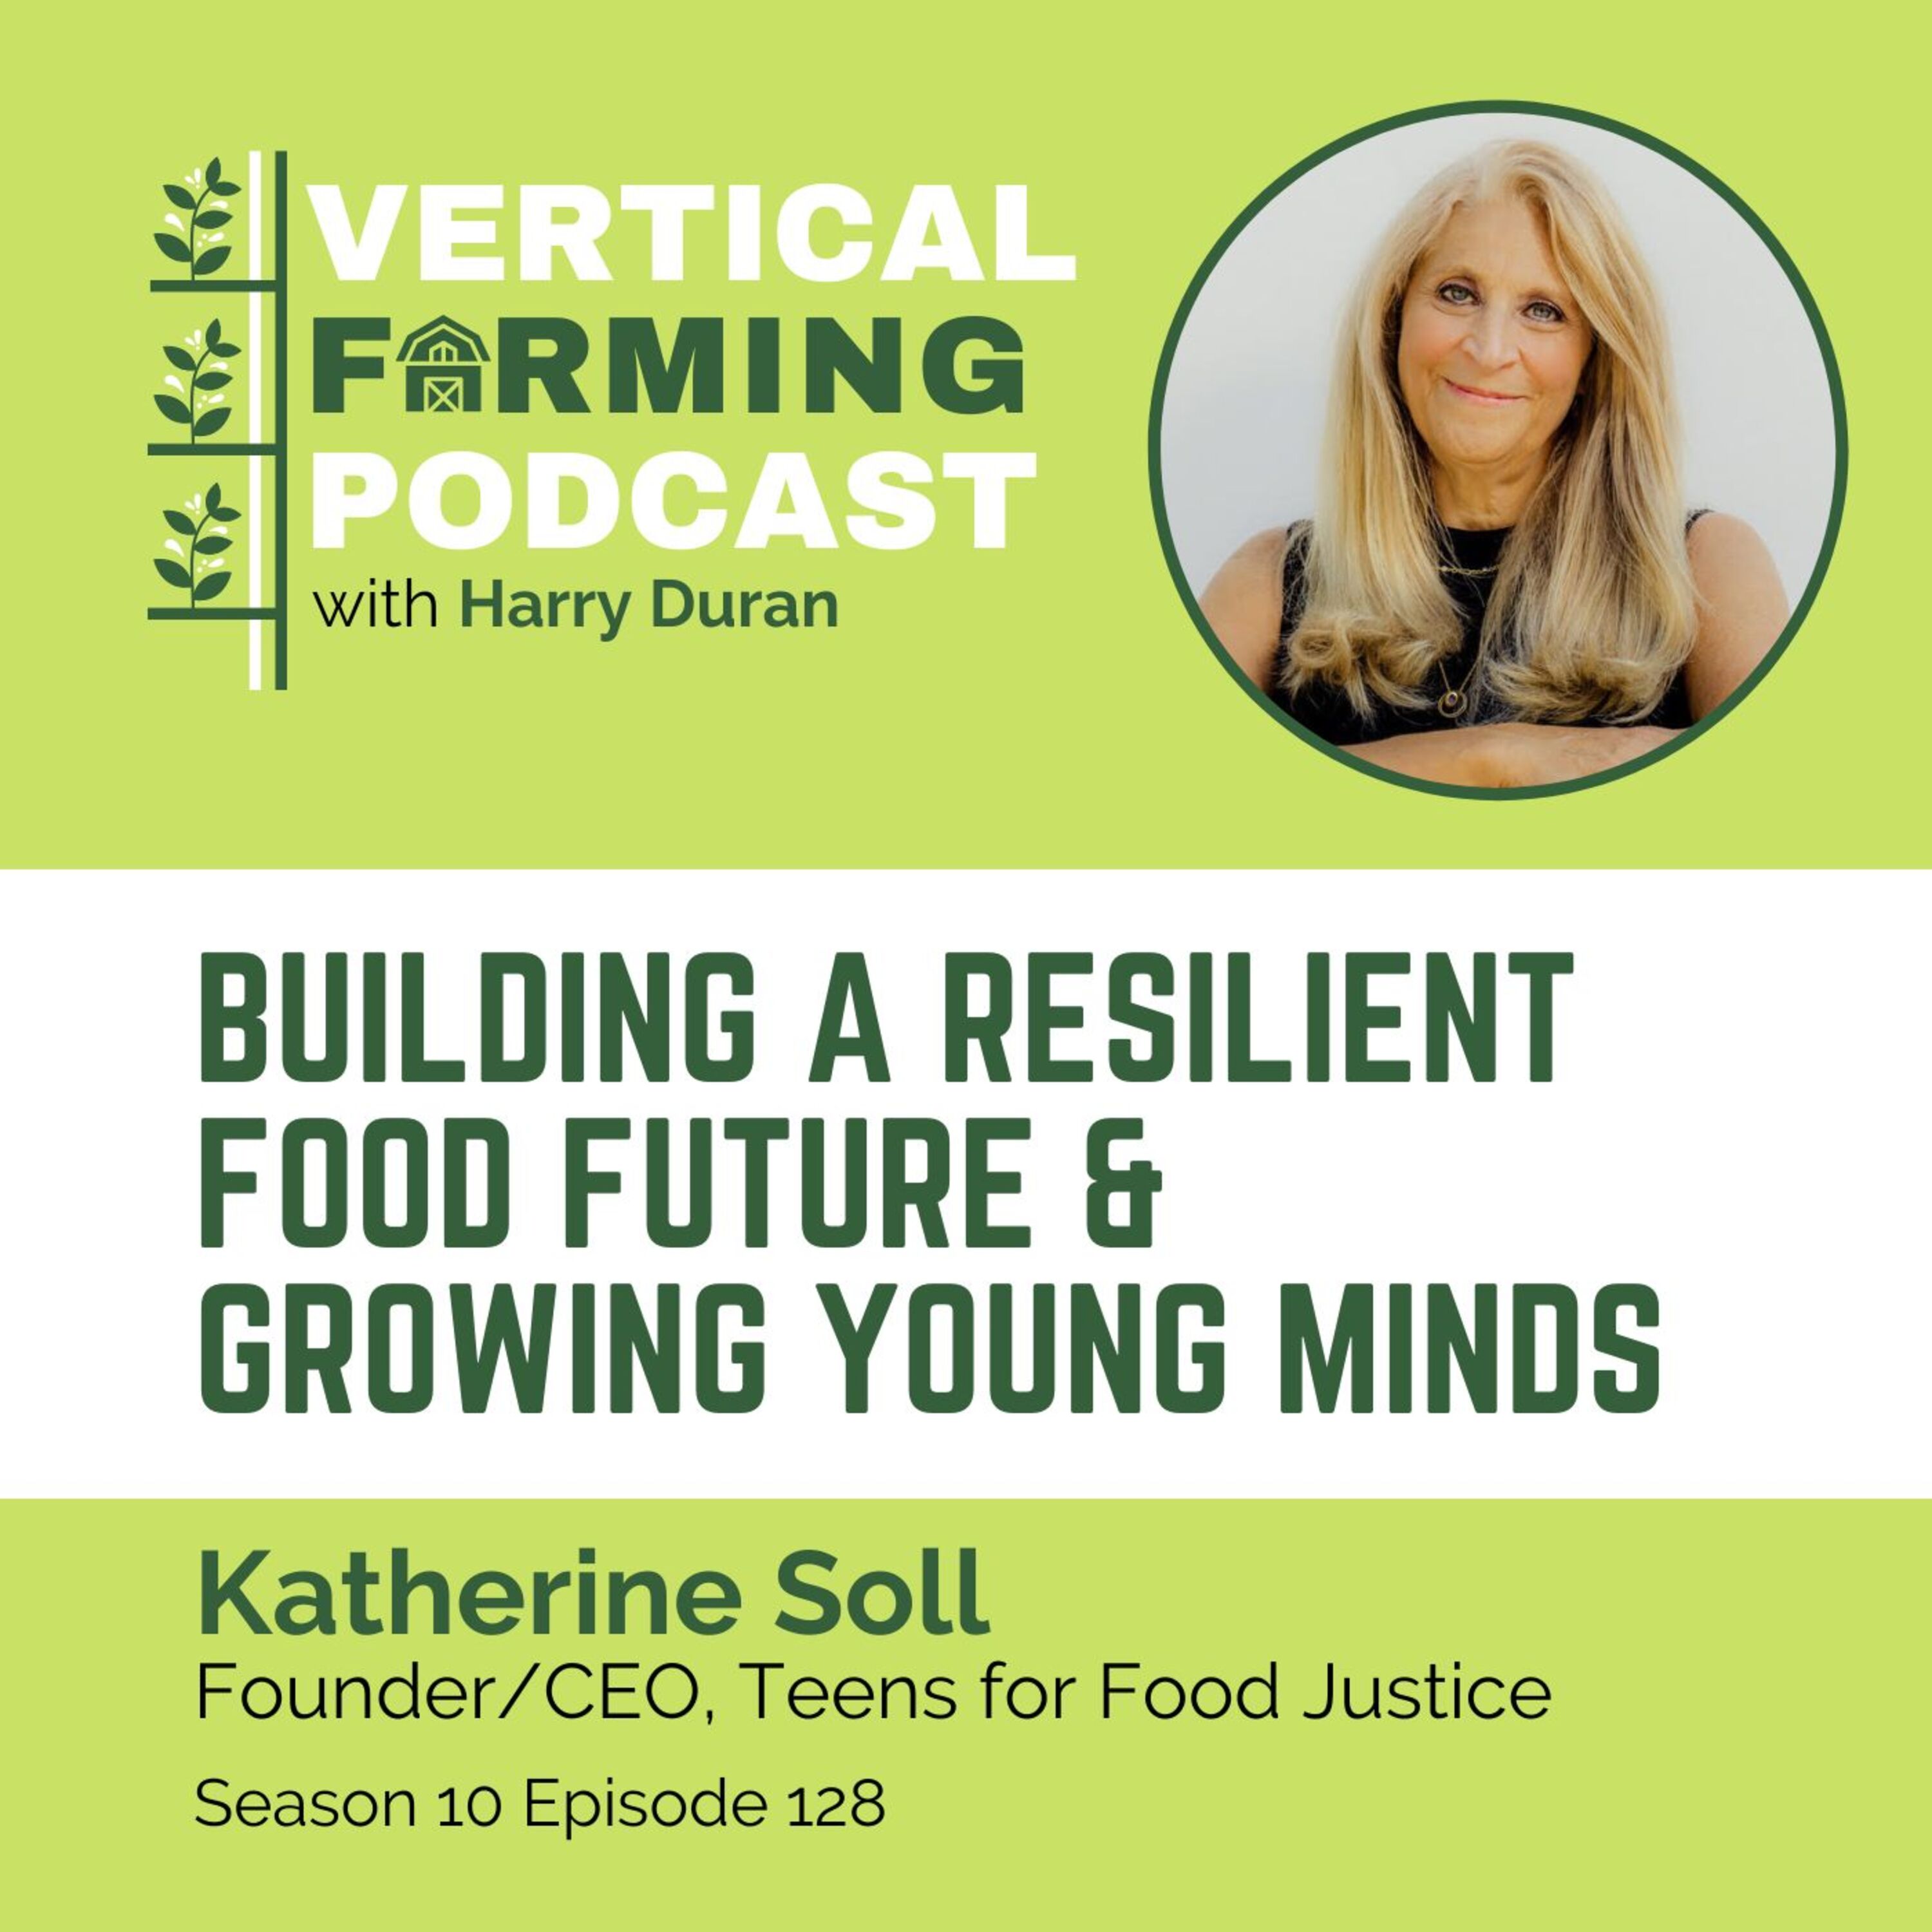 S10E128 Katherine Soll / Teens for Food Justice - Building a Resilient Food Future & Growing Young Minds